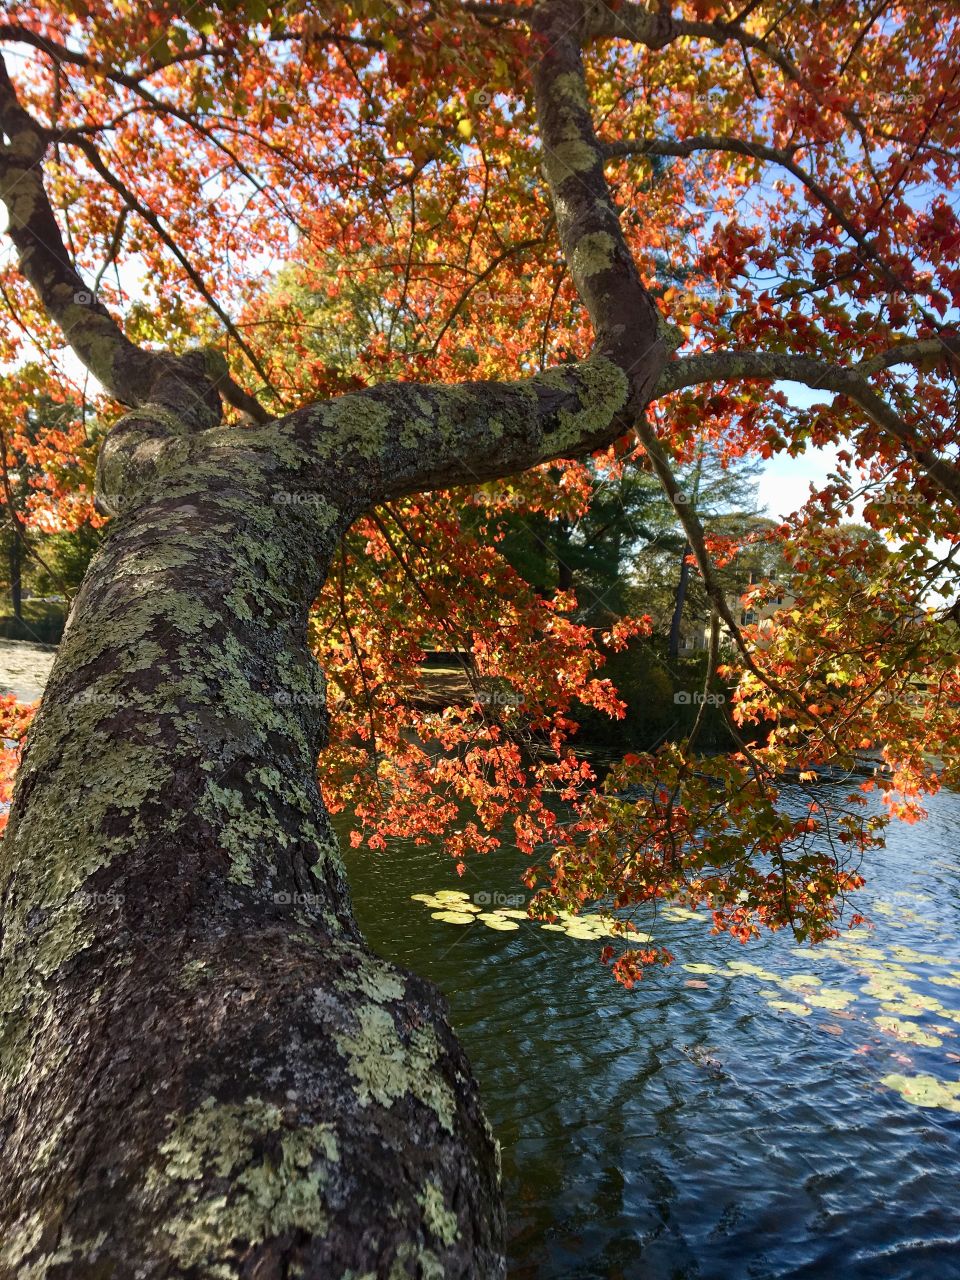 First person perspective of climbing a tree over a calm pond. Reminiscent of childhood days of climbing trees on a warm, fall day.